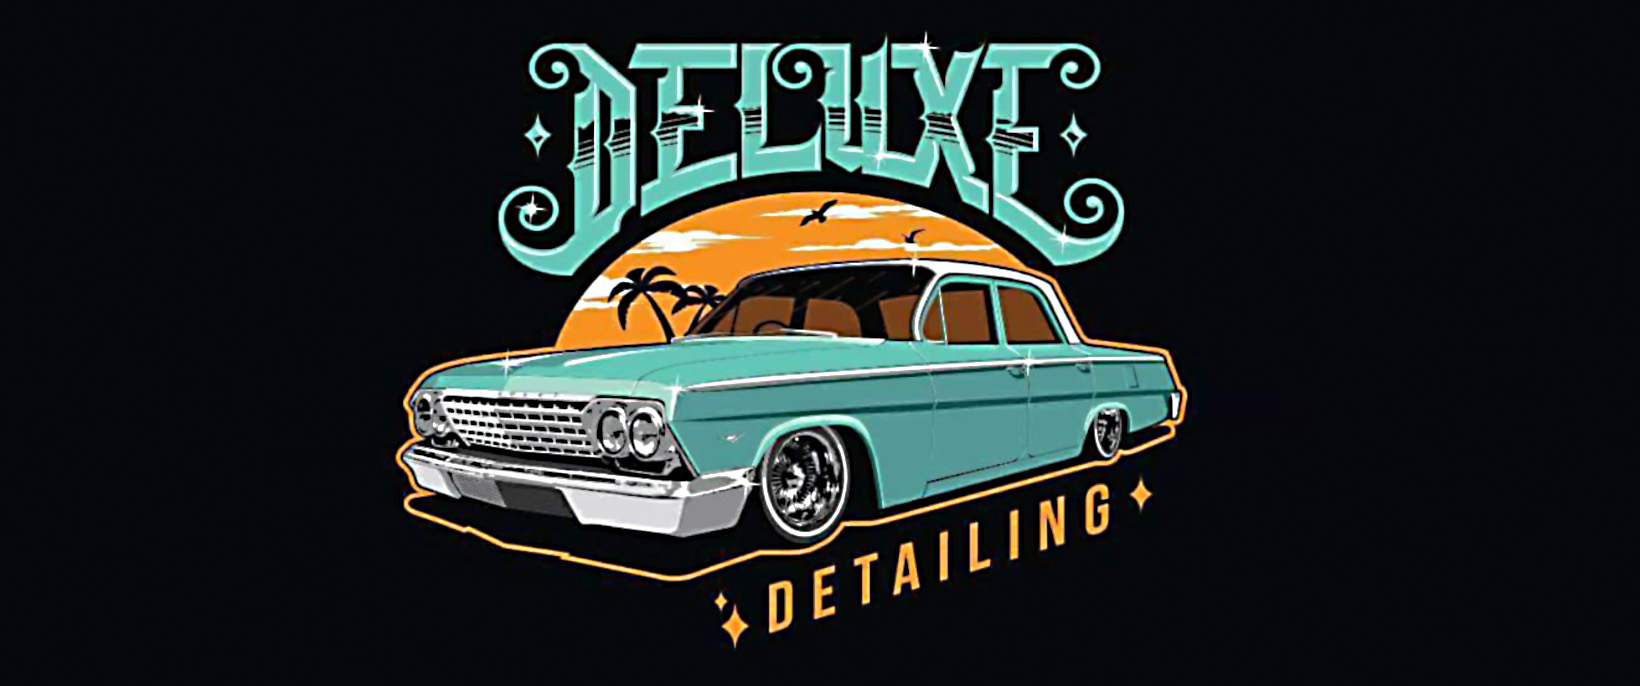 Engine Detailing, Deluxe Detailing